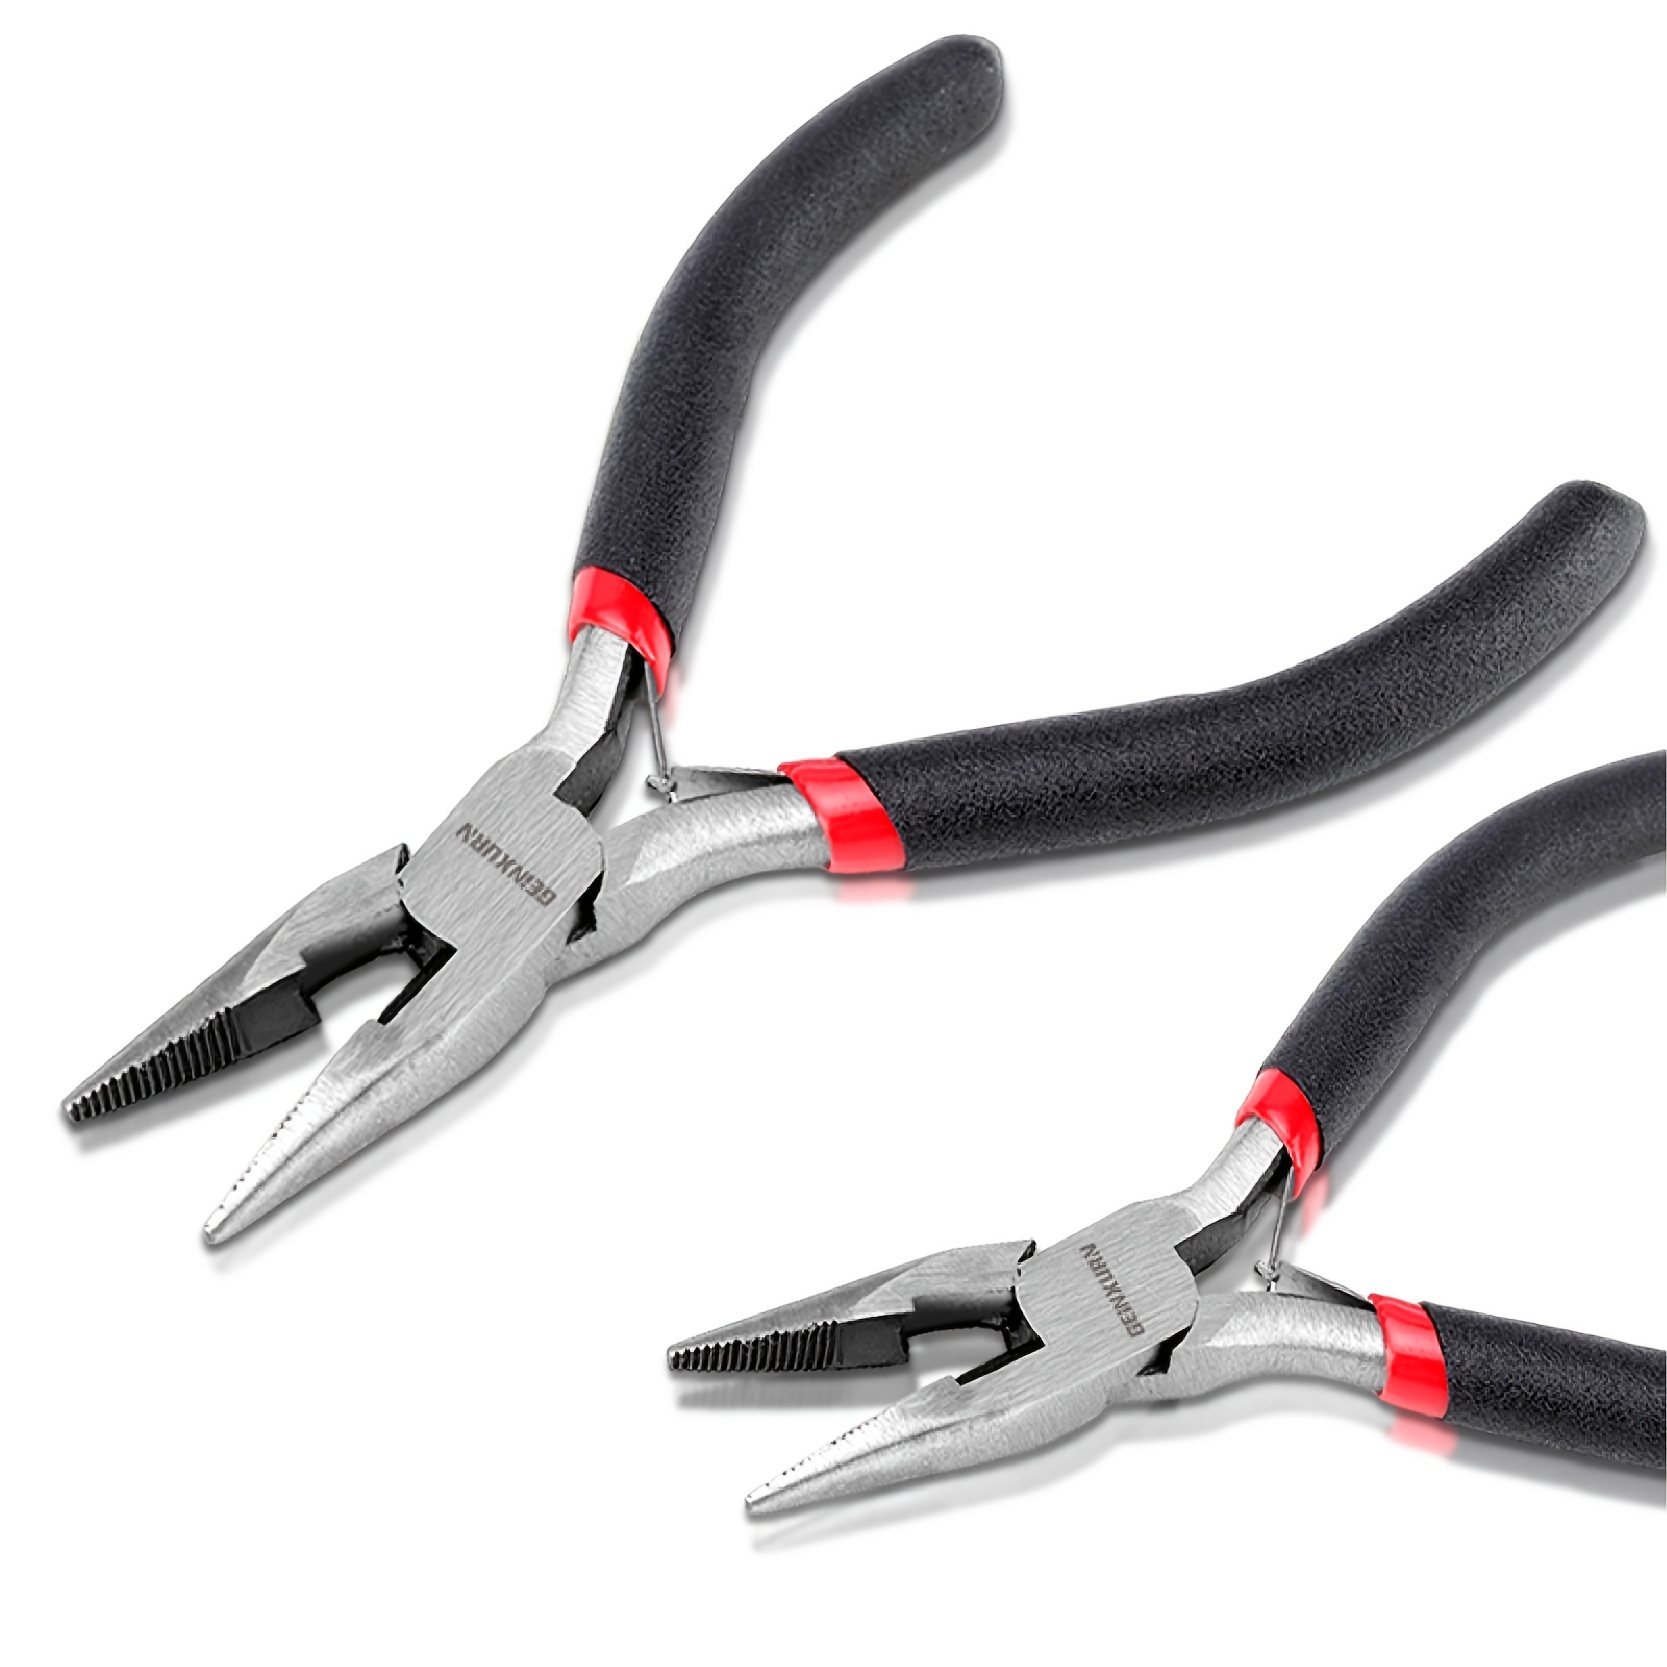 

4.5 Inch Mini Needle Nose Pliers: The Perfect Diy Hand Tool For Crafting And Repairing